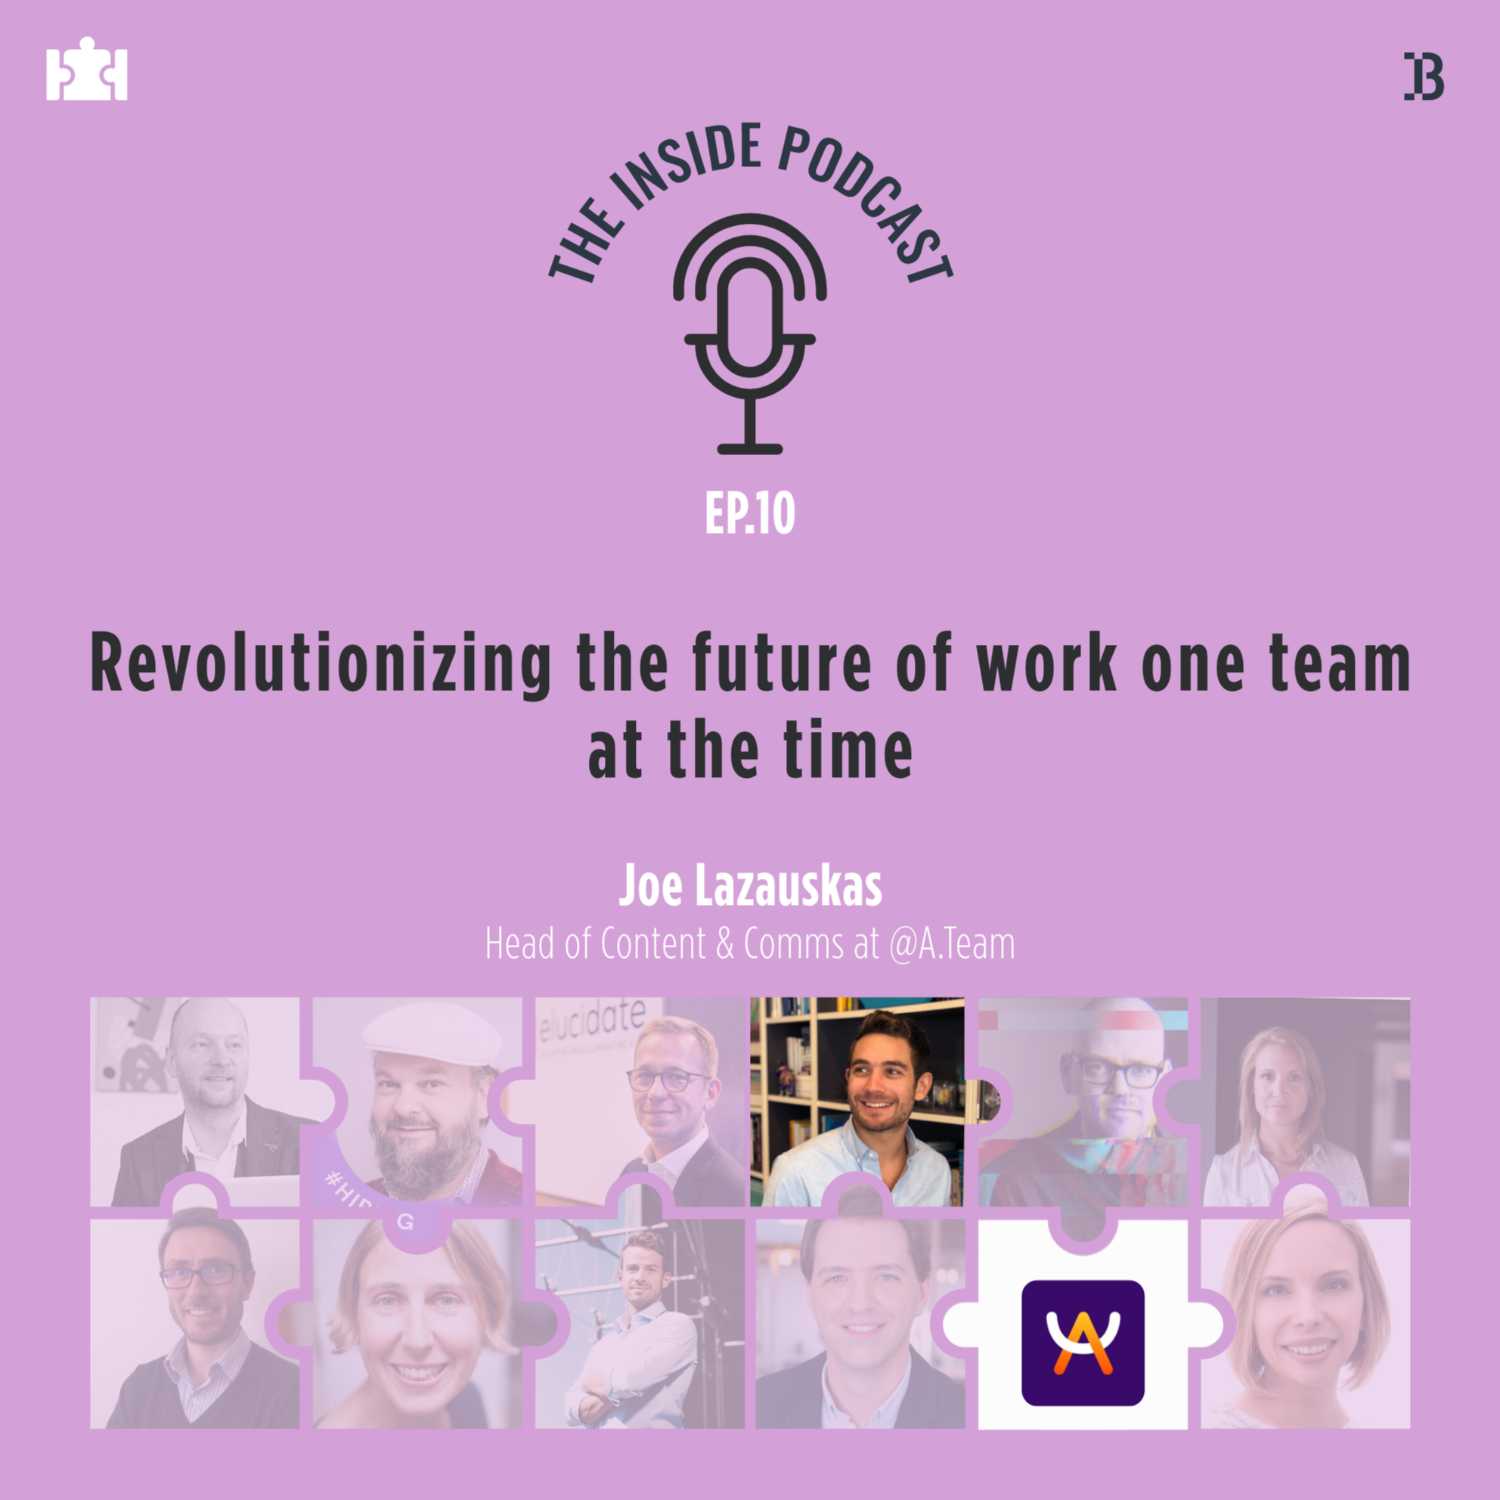 Employer Branding T.I.P S05Ep.10 | “Revolutionizing the future of work one team at the time”, with Joe Lazauskas, Head of Content & Comms at @A.Team